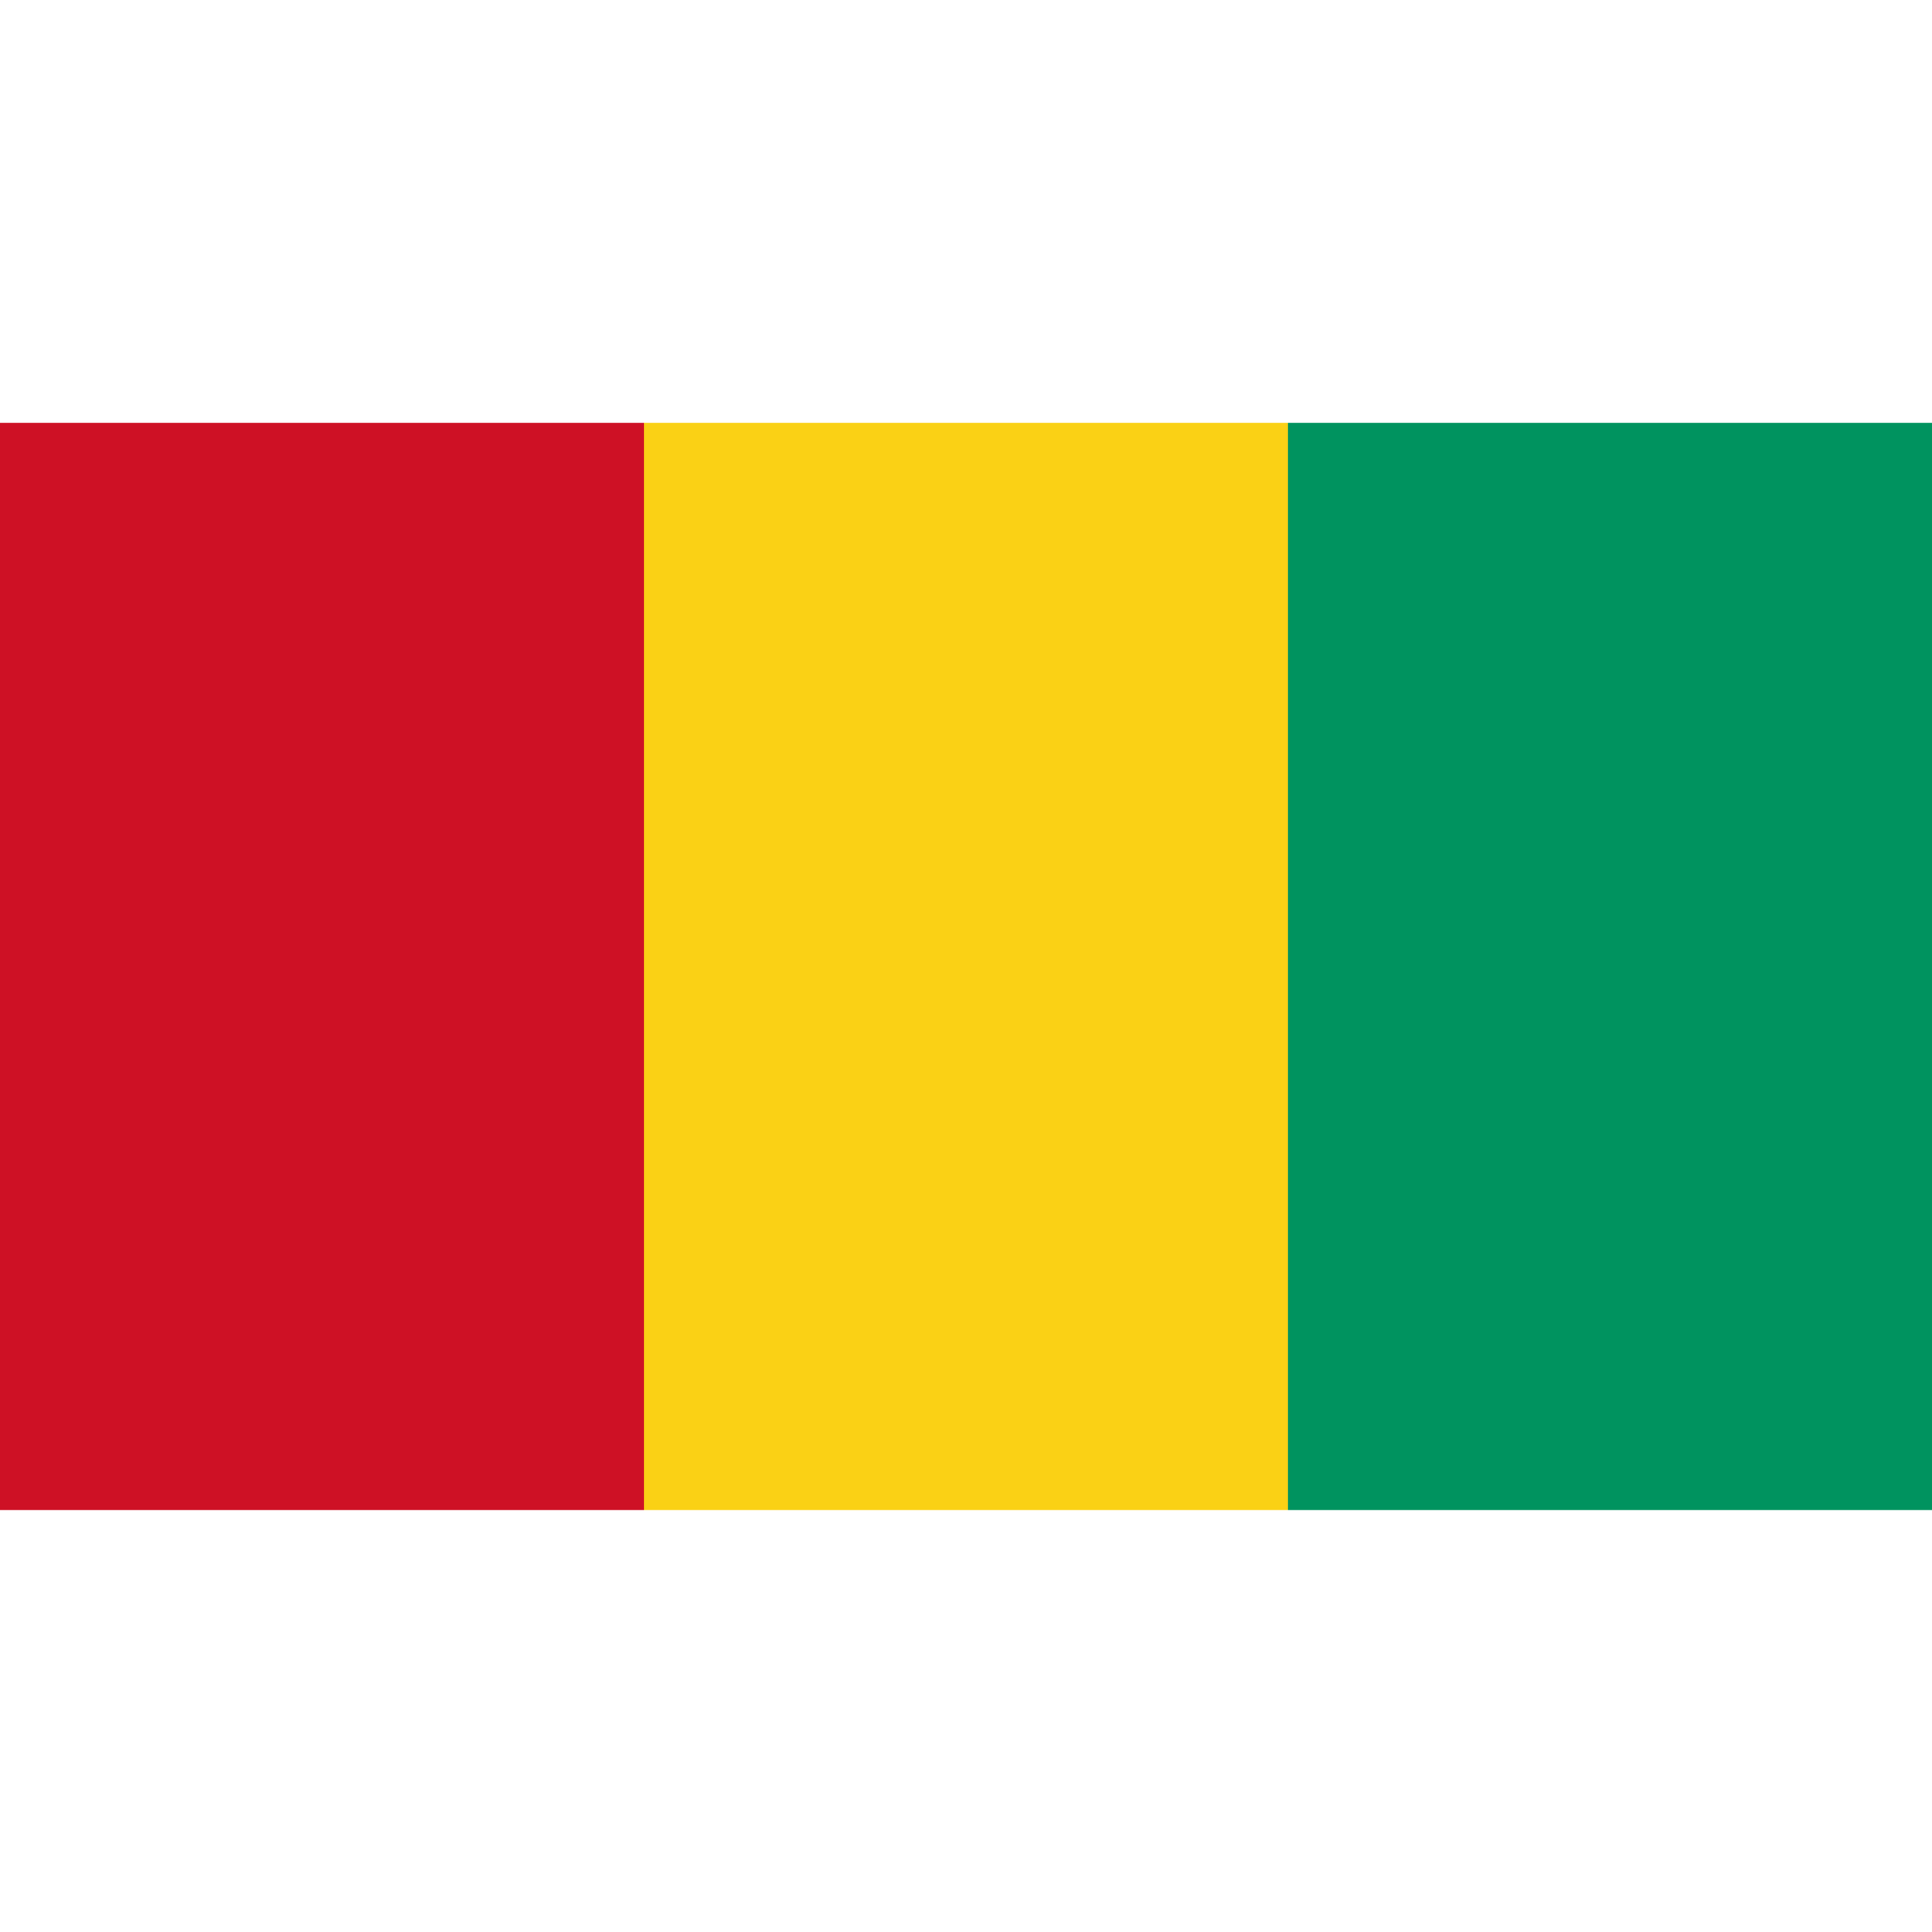 The Guinea-Conakry flag consists of 3 vertical bands in red, yellow and green.